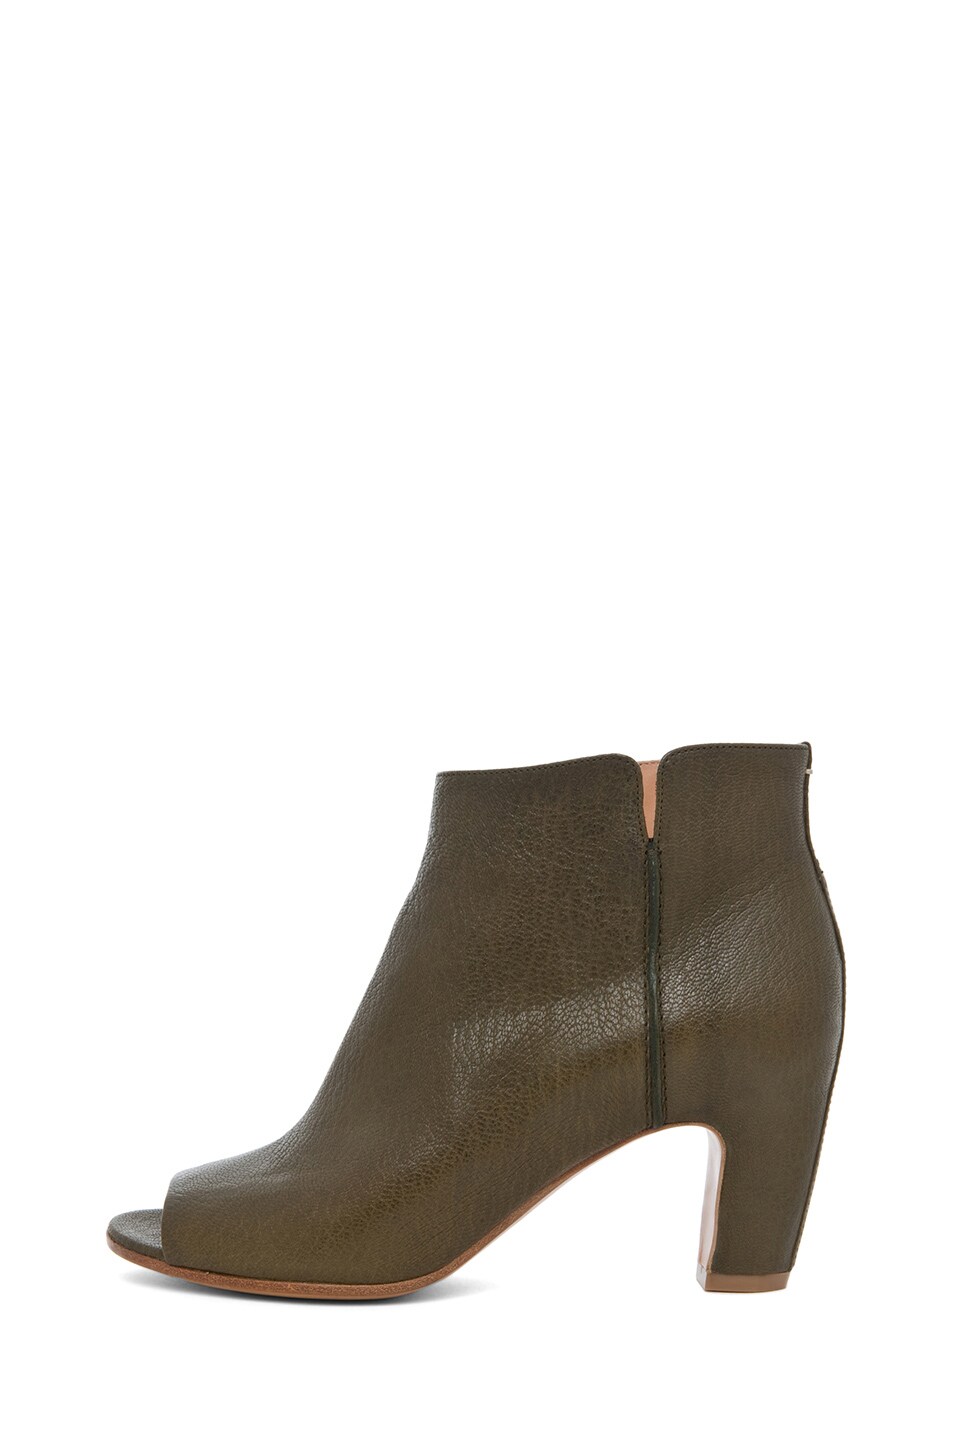 Image 1 of Maison Margiela Peep Toe Bootie with Curved Heel in Mud